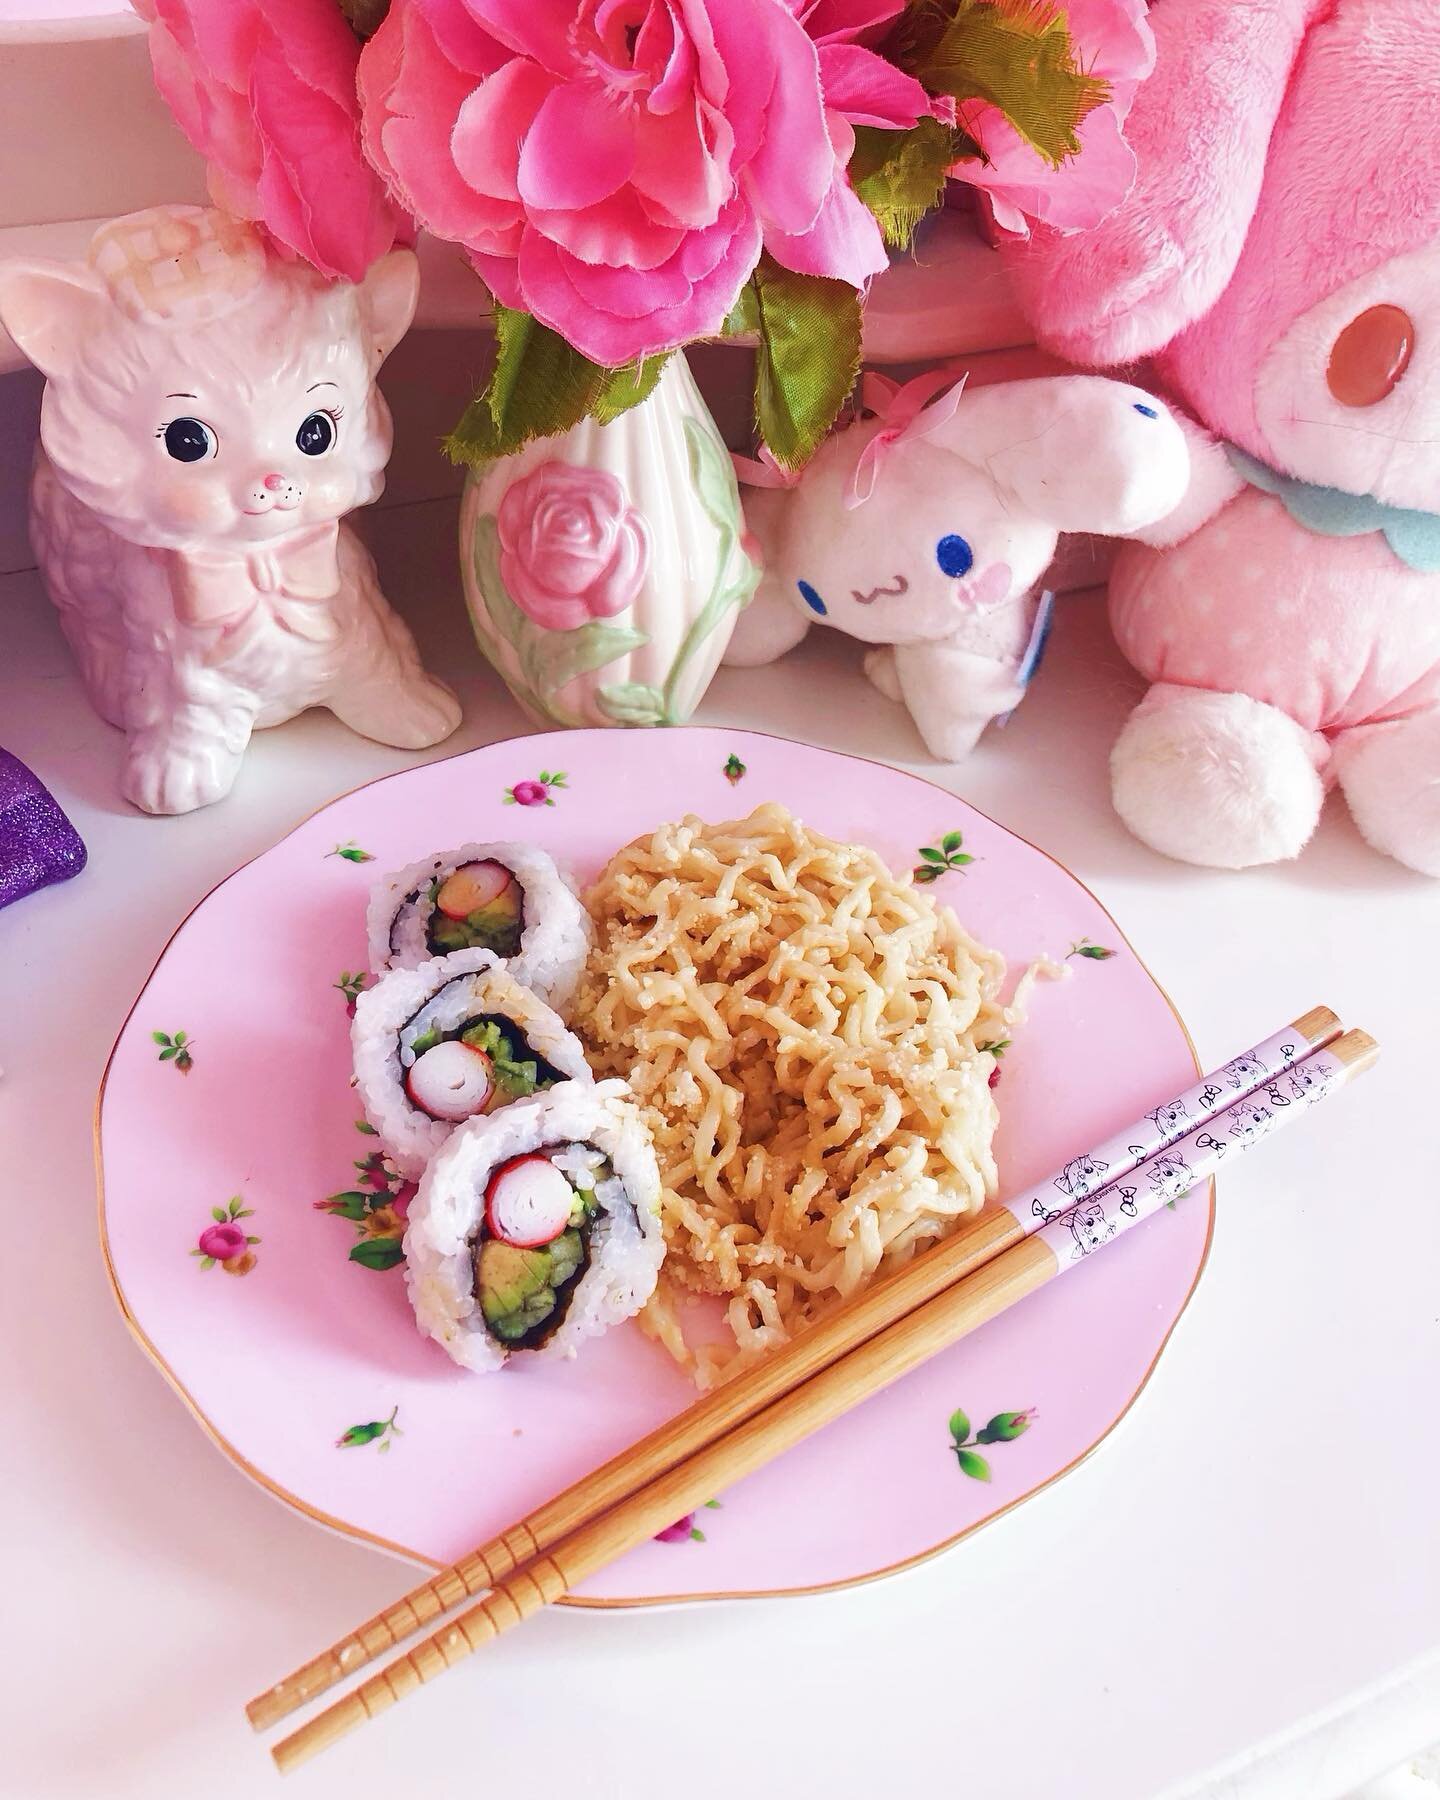 I had California Roll and made some
Peanut butter noodles for the first time! It was SOOO good! 🥰💕
.
#margaritabloom #californiaroll #noodles #foodie #foodporn #foodblogger #foodstagram #healthyfood #shabbychic #asianfood #peanutbutternoodles #kawa